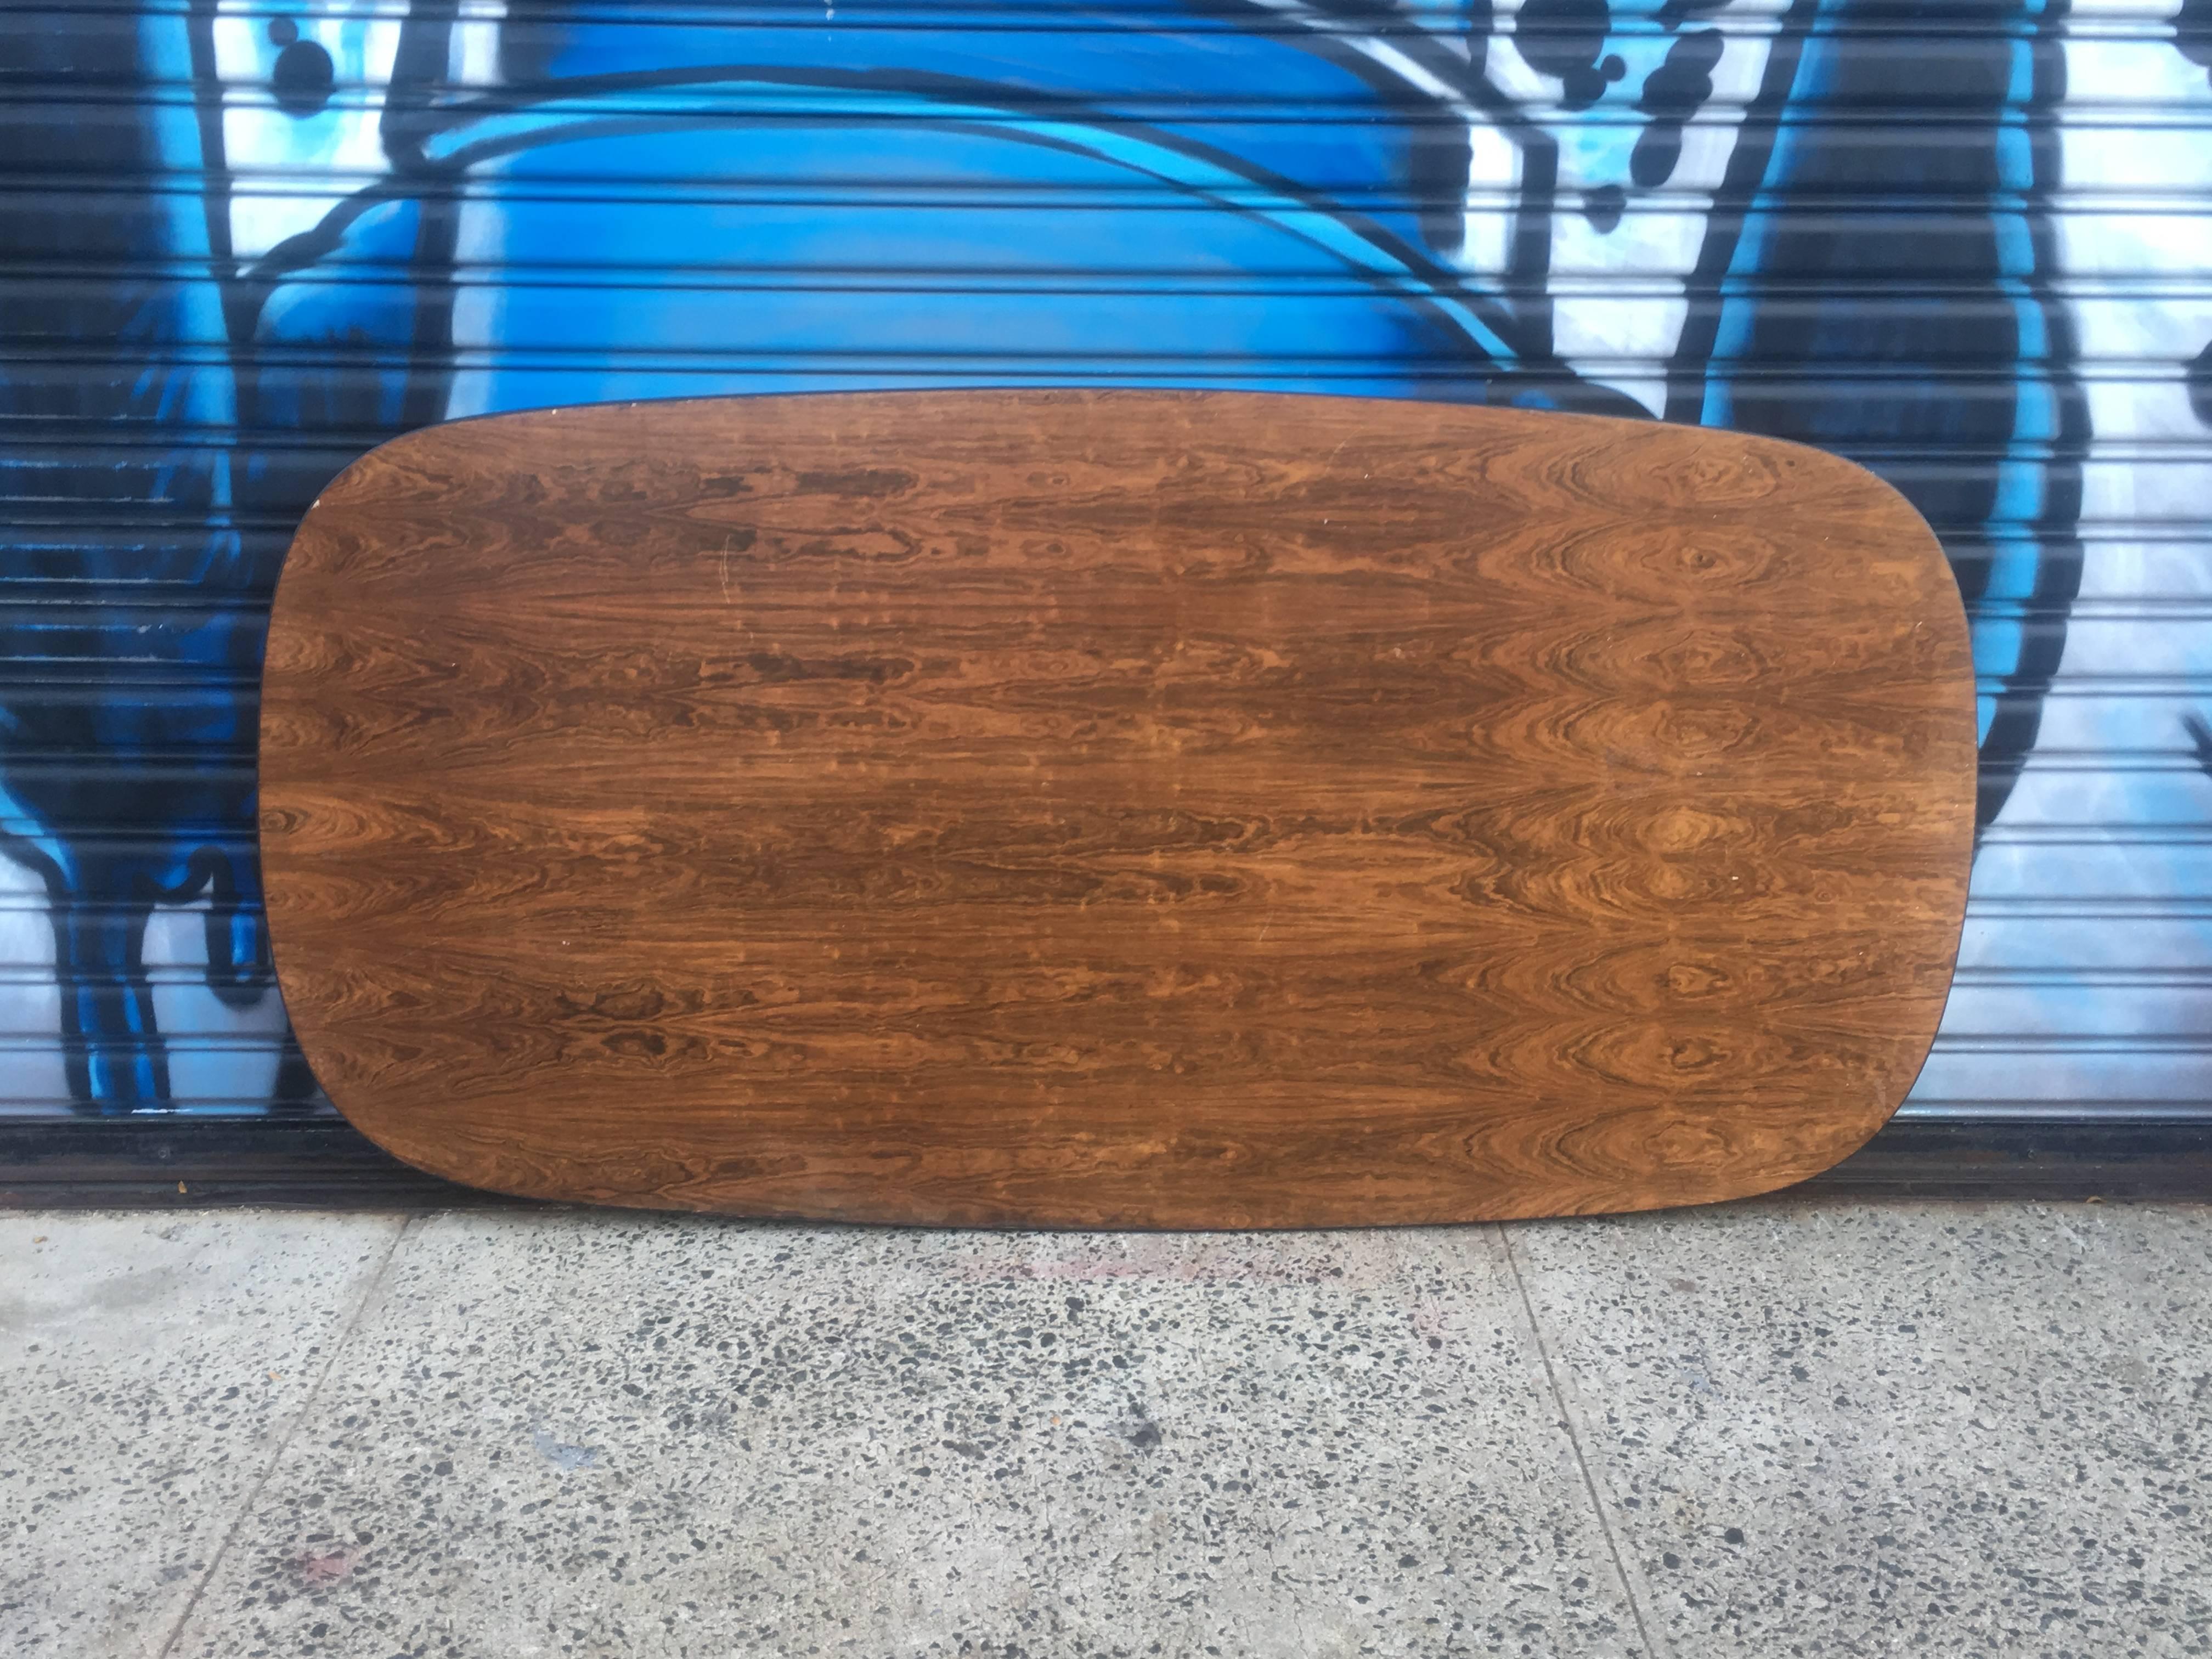 7 foot Herman Miller Eames rosewood conference of dining table. In good condition with normal wear. Aluminum segmented base. Purchased from original owner, and architect who had this as he conference table at his firm on Fifth Avenue in the